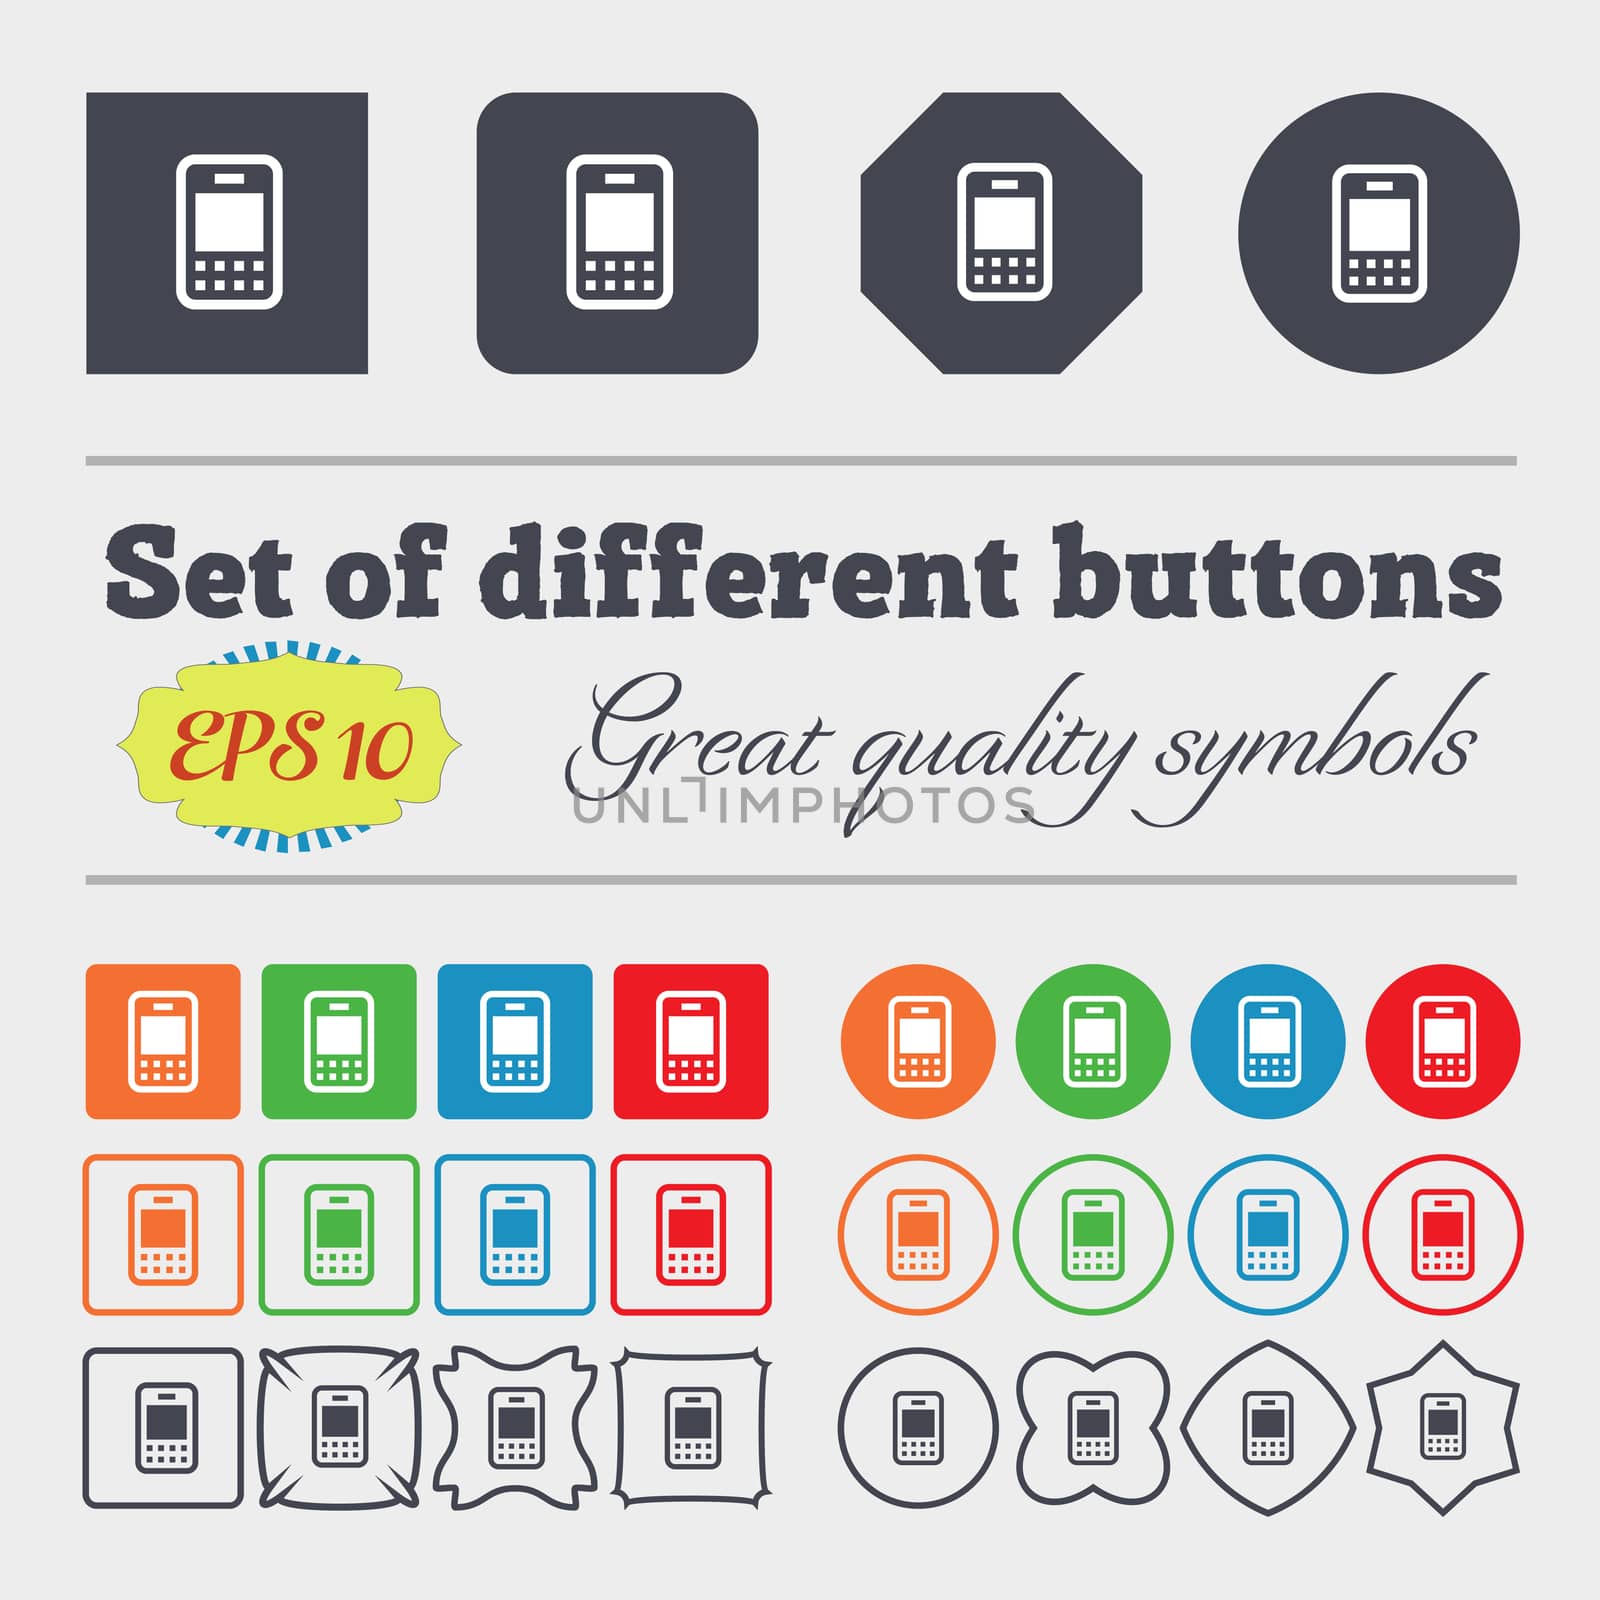 Mobile telecommunications technology icon sign Big set of colorful, diverse, high-quality buttons. illustration